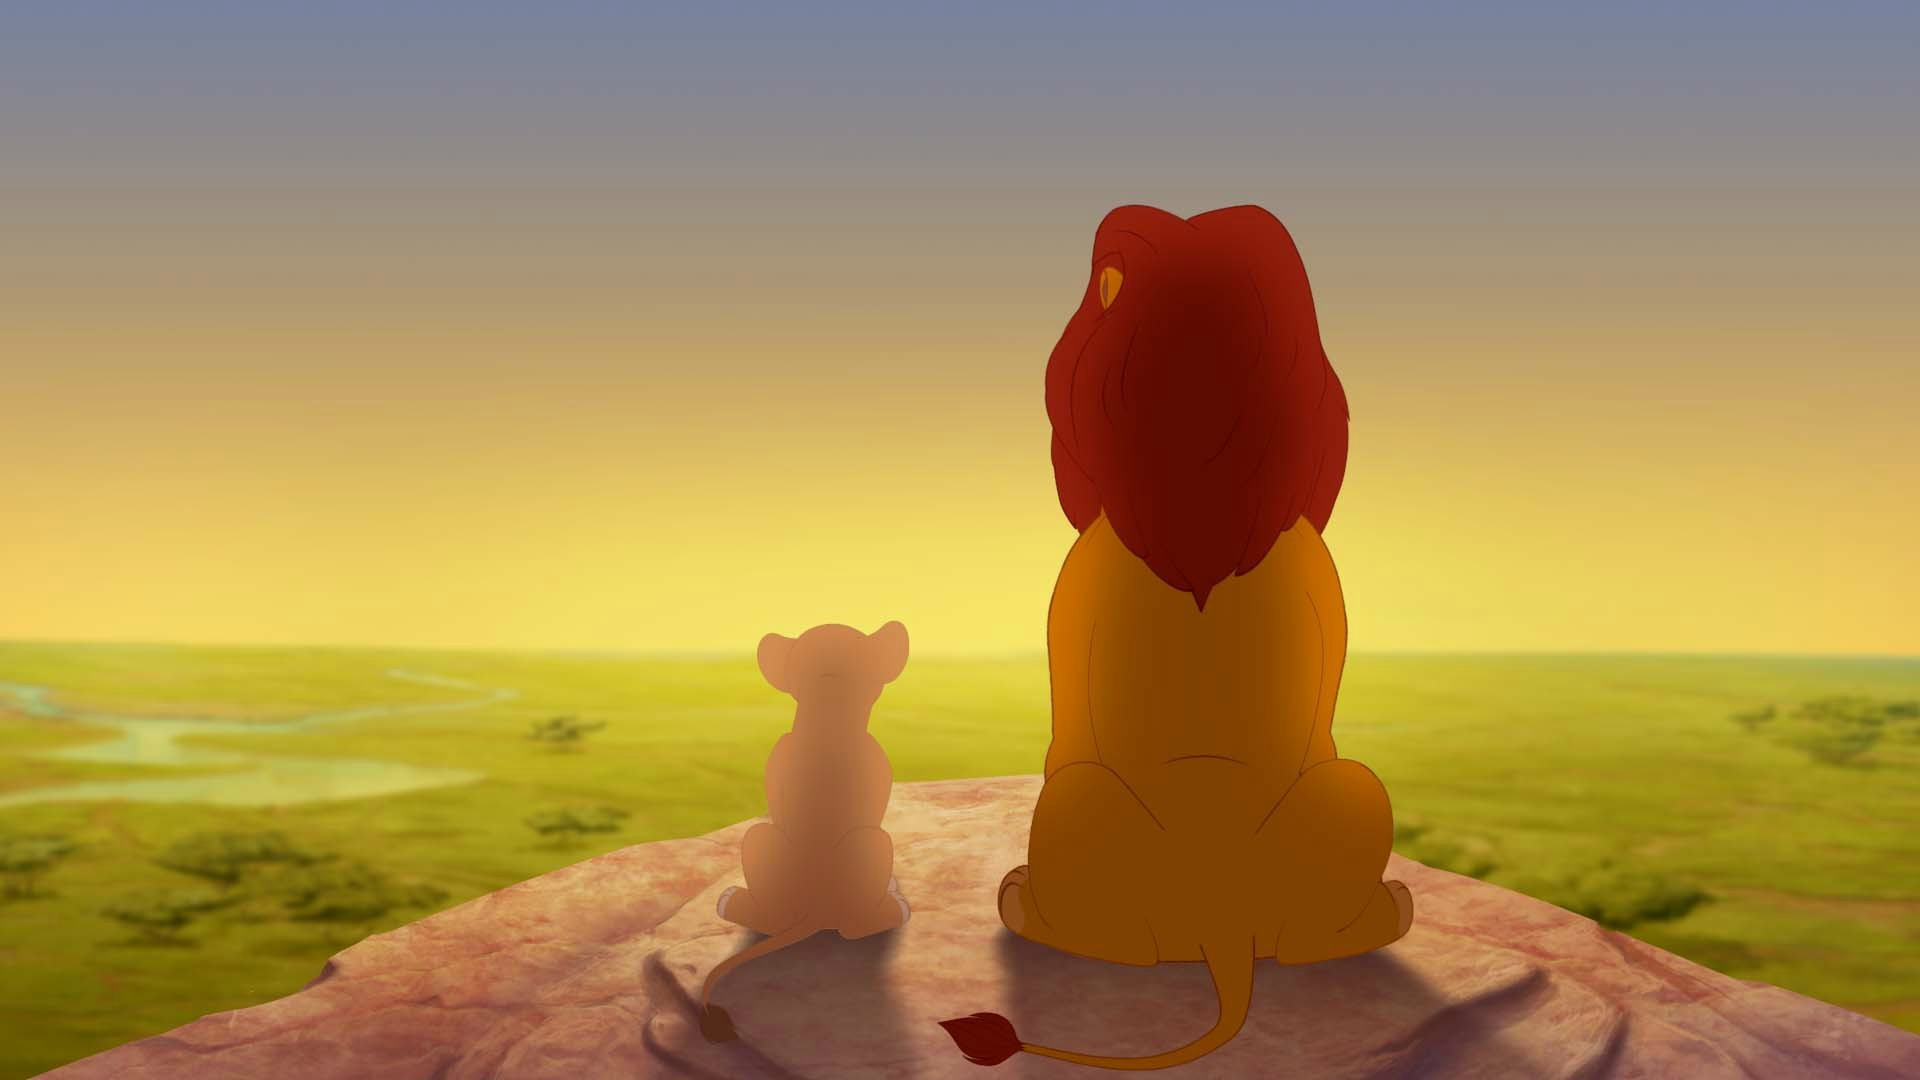 The circle of life is a famous example of a play in pattern the universe display to us. Source: http://vignette3.wikia.nocookie.net/lionking/images/a/af/Kiara_Simba_Sunset.png/revision/latest?cb=20151009180557